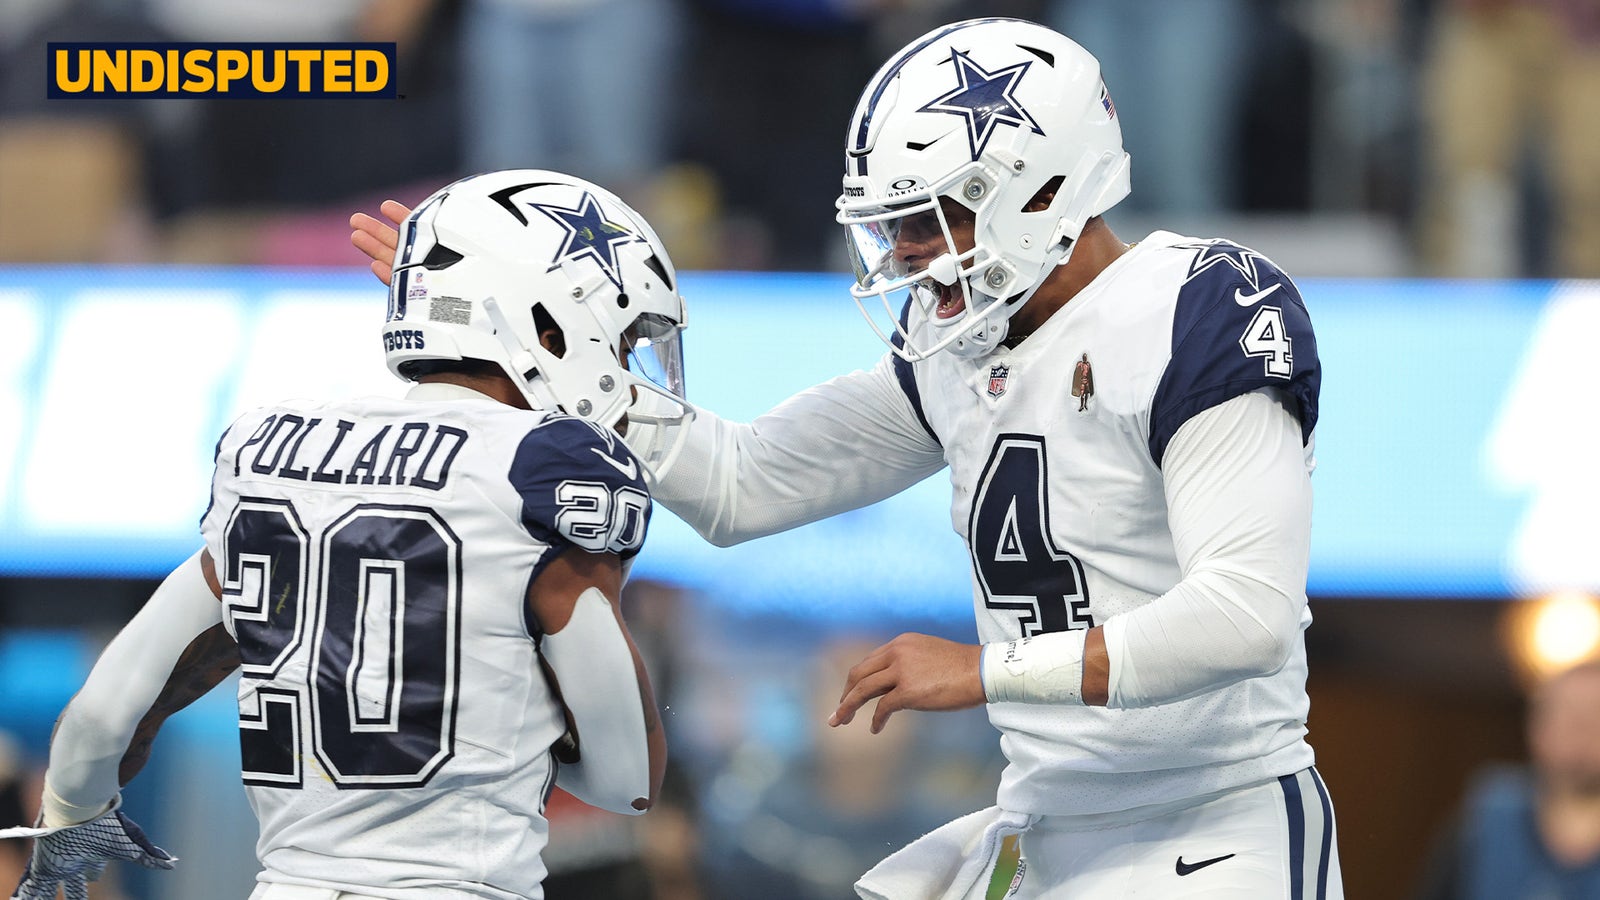 Odds of Cowboys missing the playoffs after 4-2 start